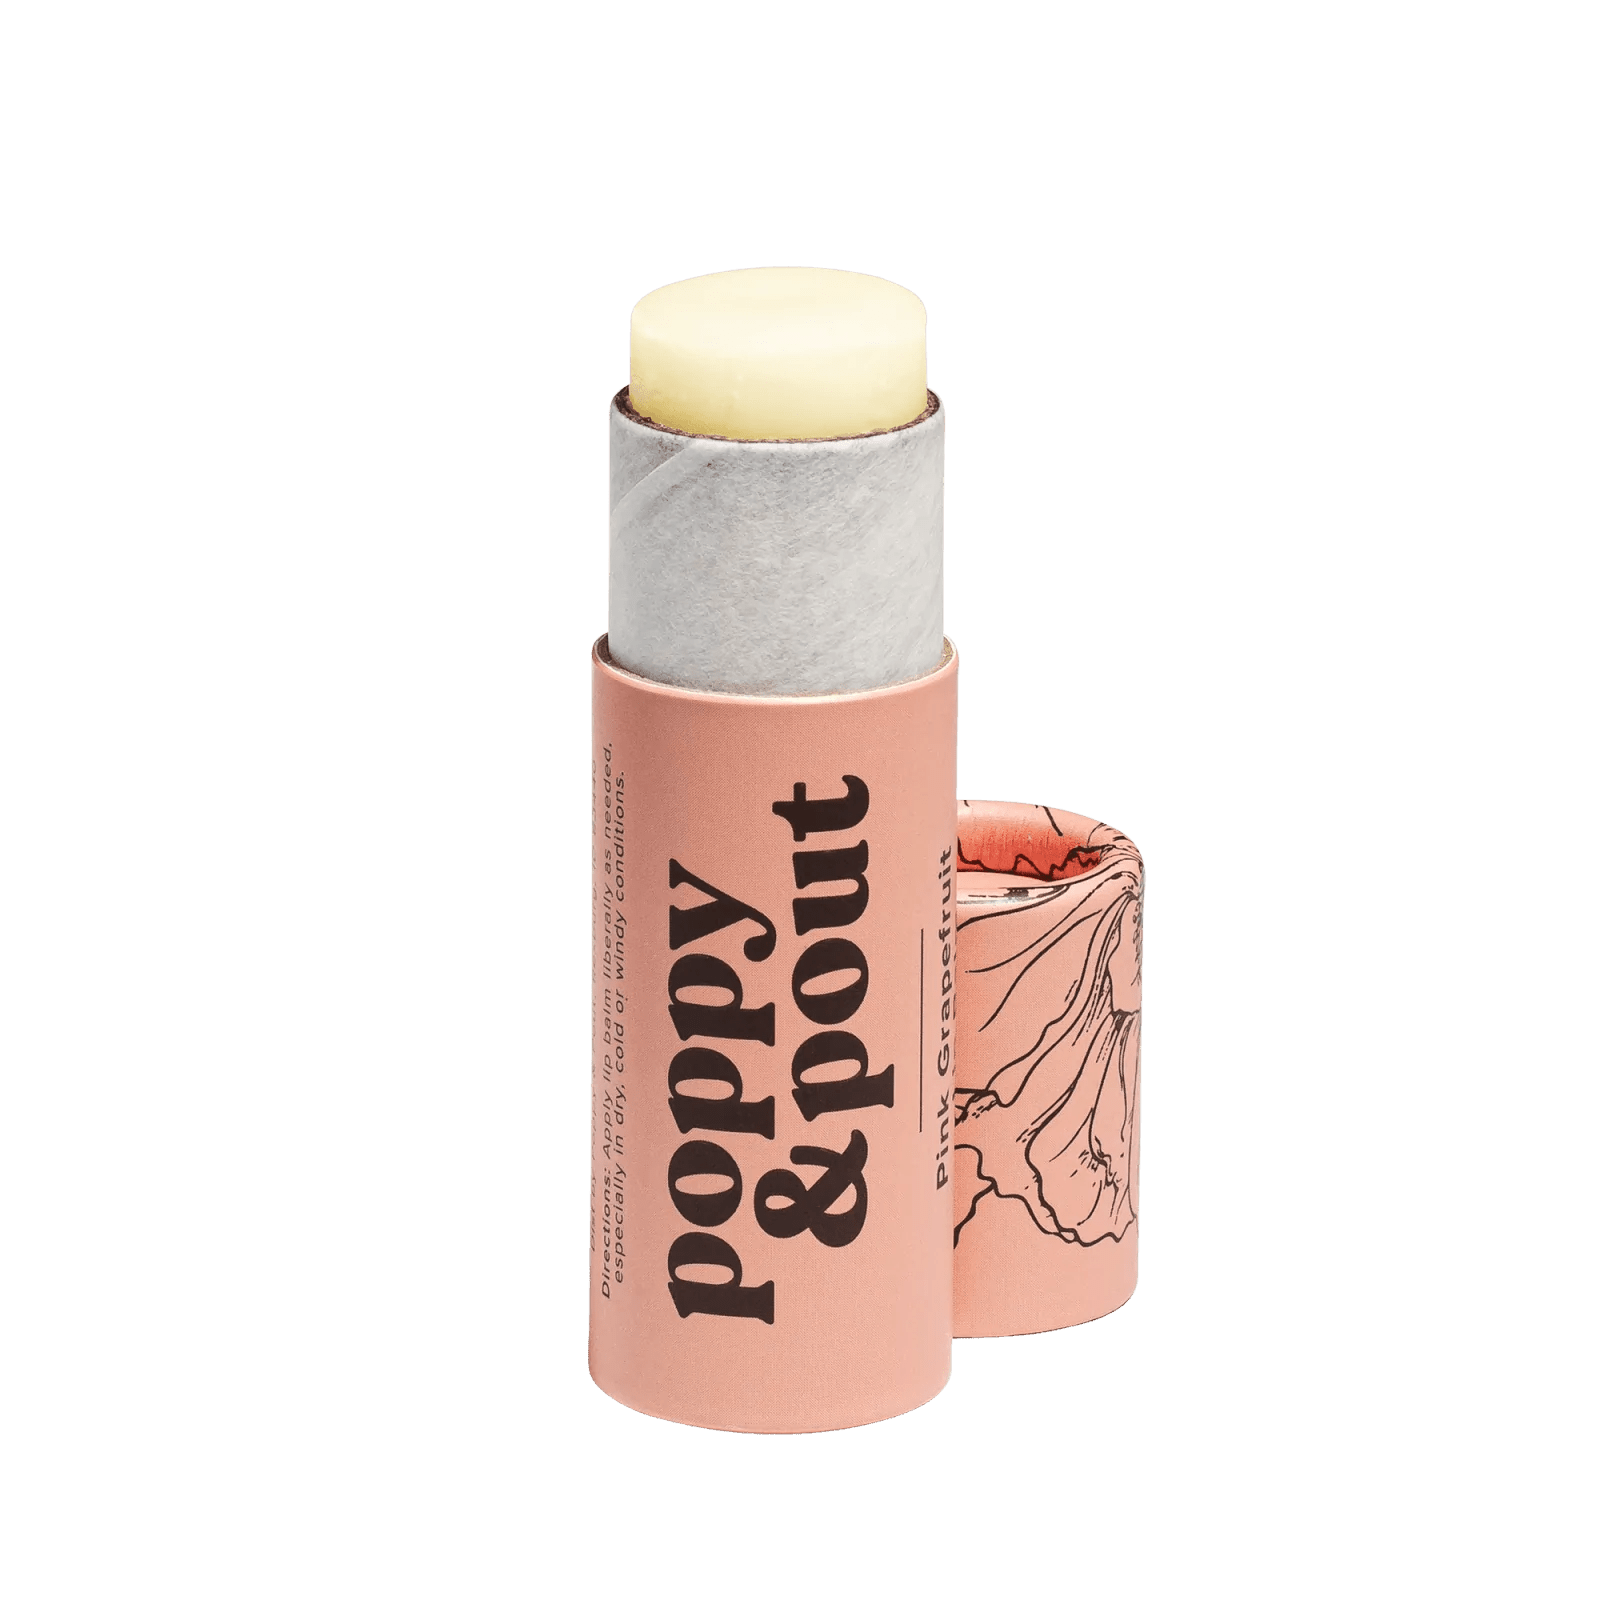 Poppy & Pout Lip Balm - Marley's Monsters